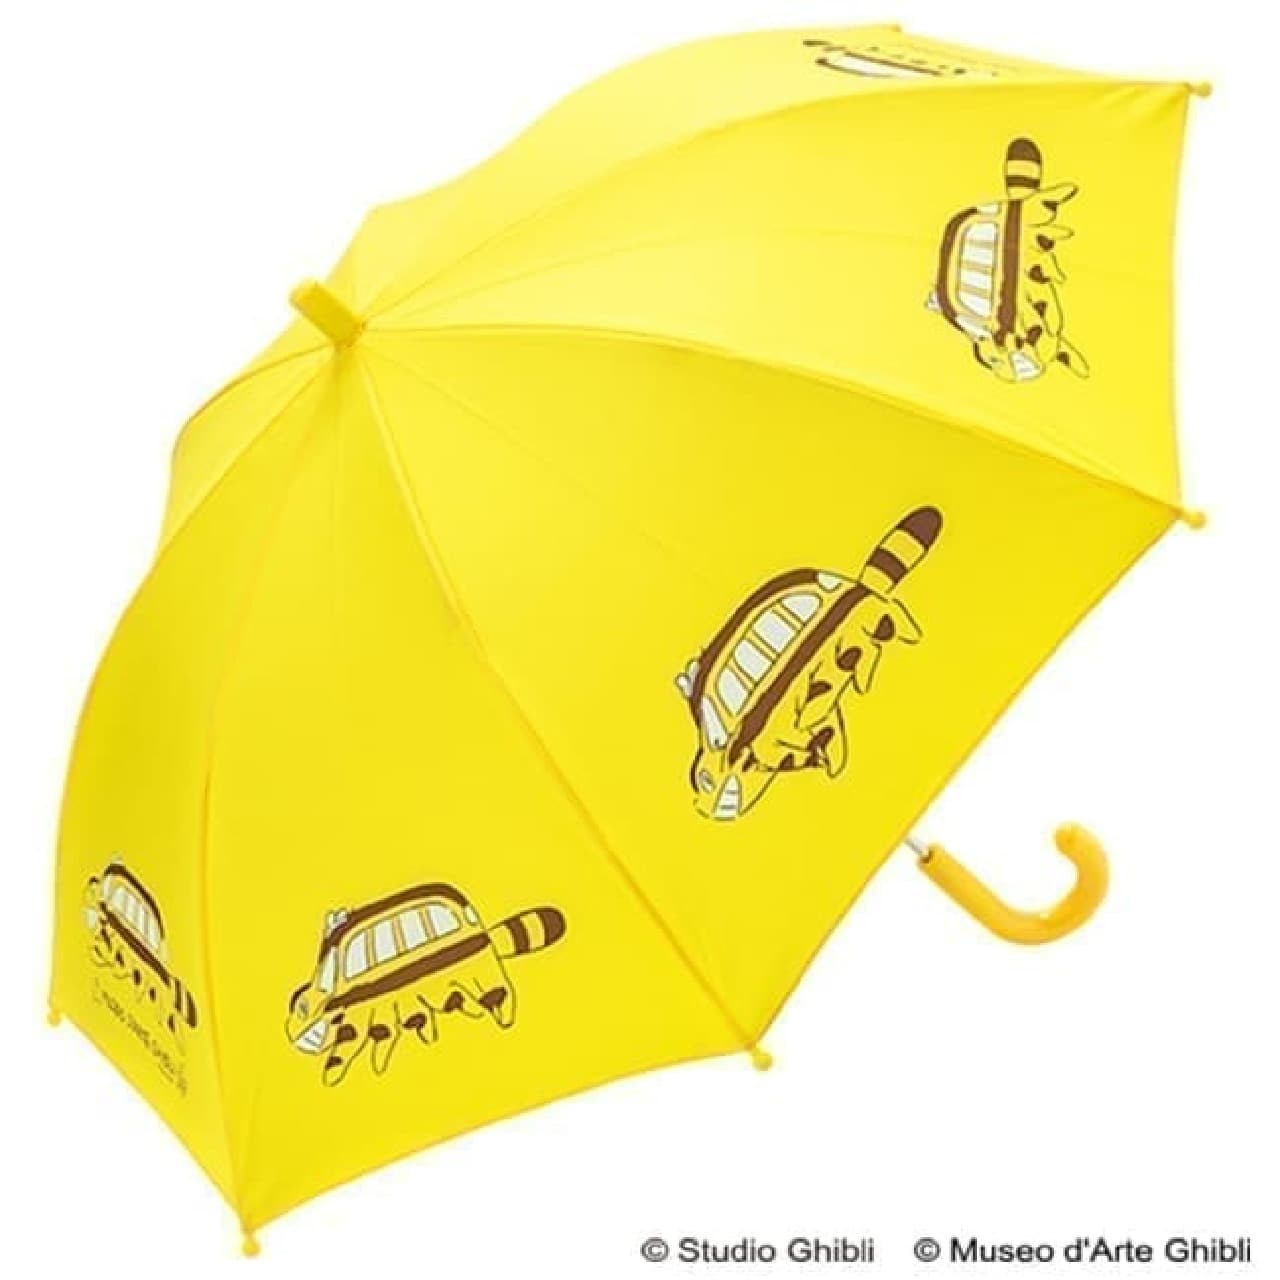 Five products limited to the Ghibli Museum, Mitaka are now available online at the "Donguri Republic" --Totoro T-shirts, catbus umbrellas, etc.